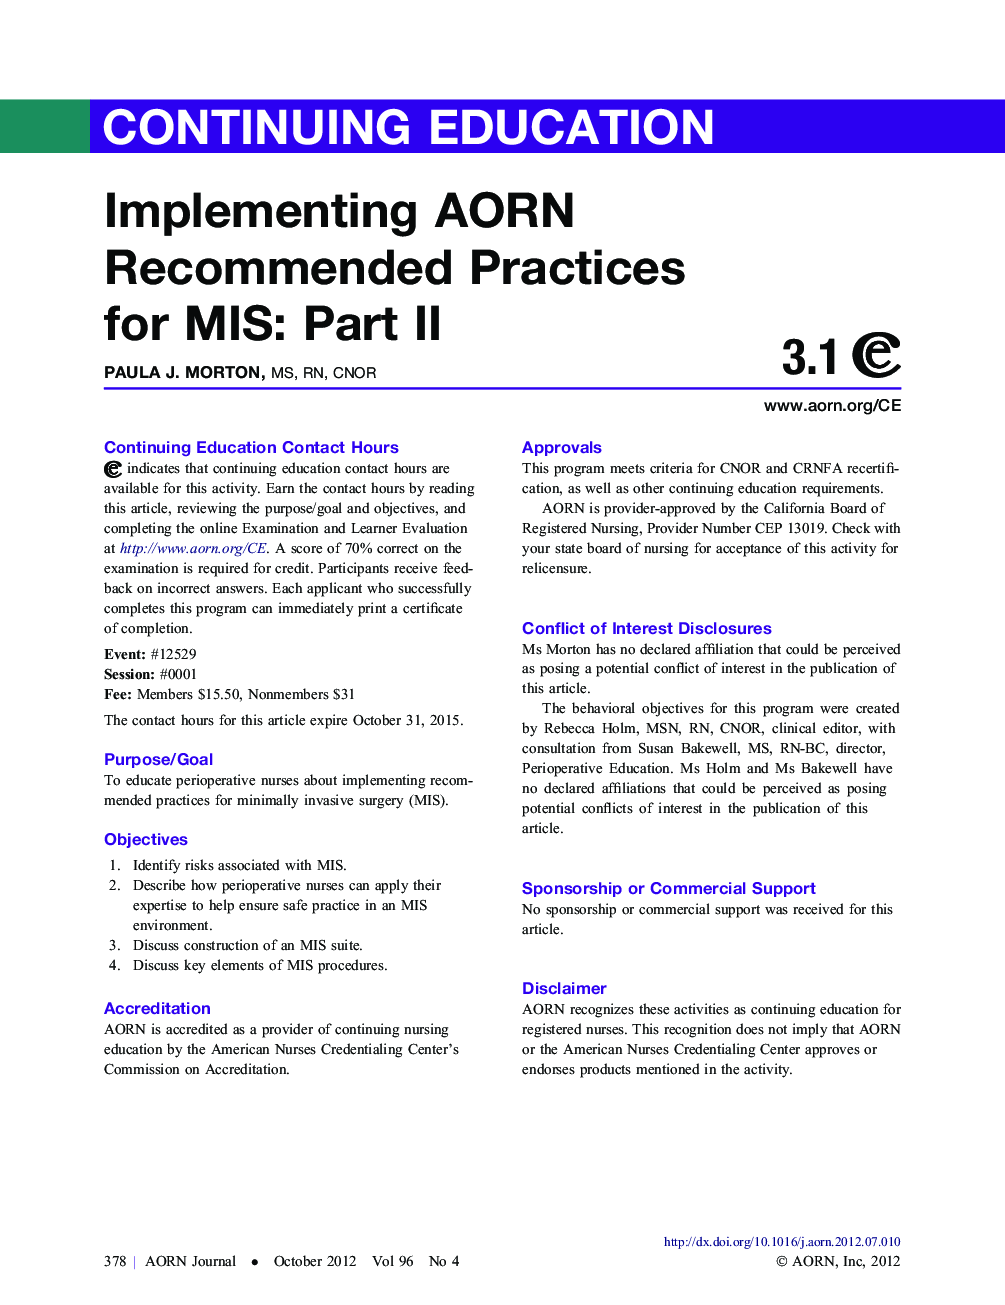 Implementing AORN Recommended Practices for MIS: Part II